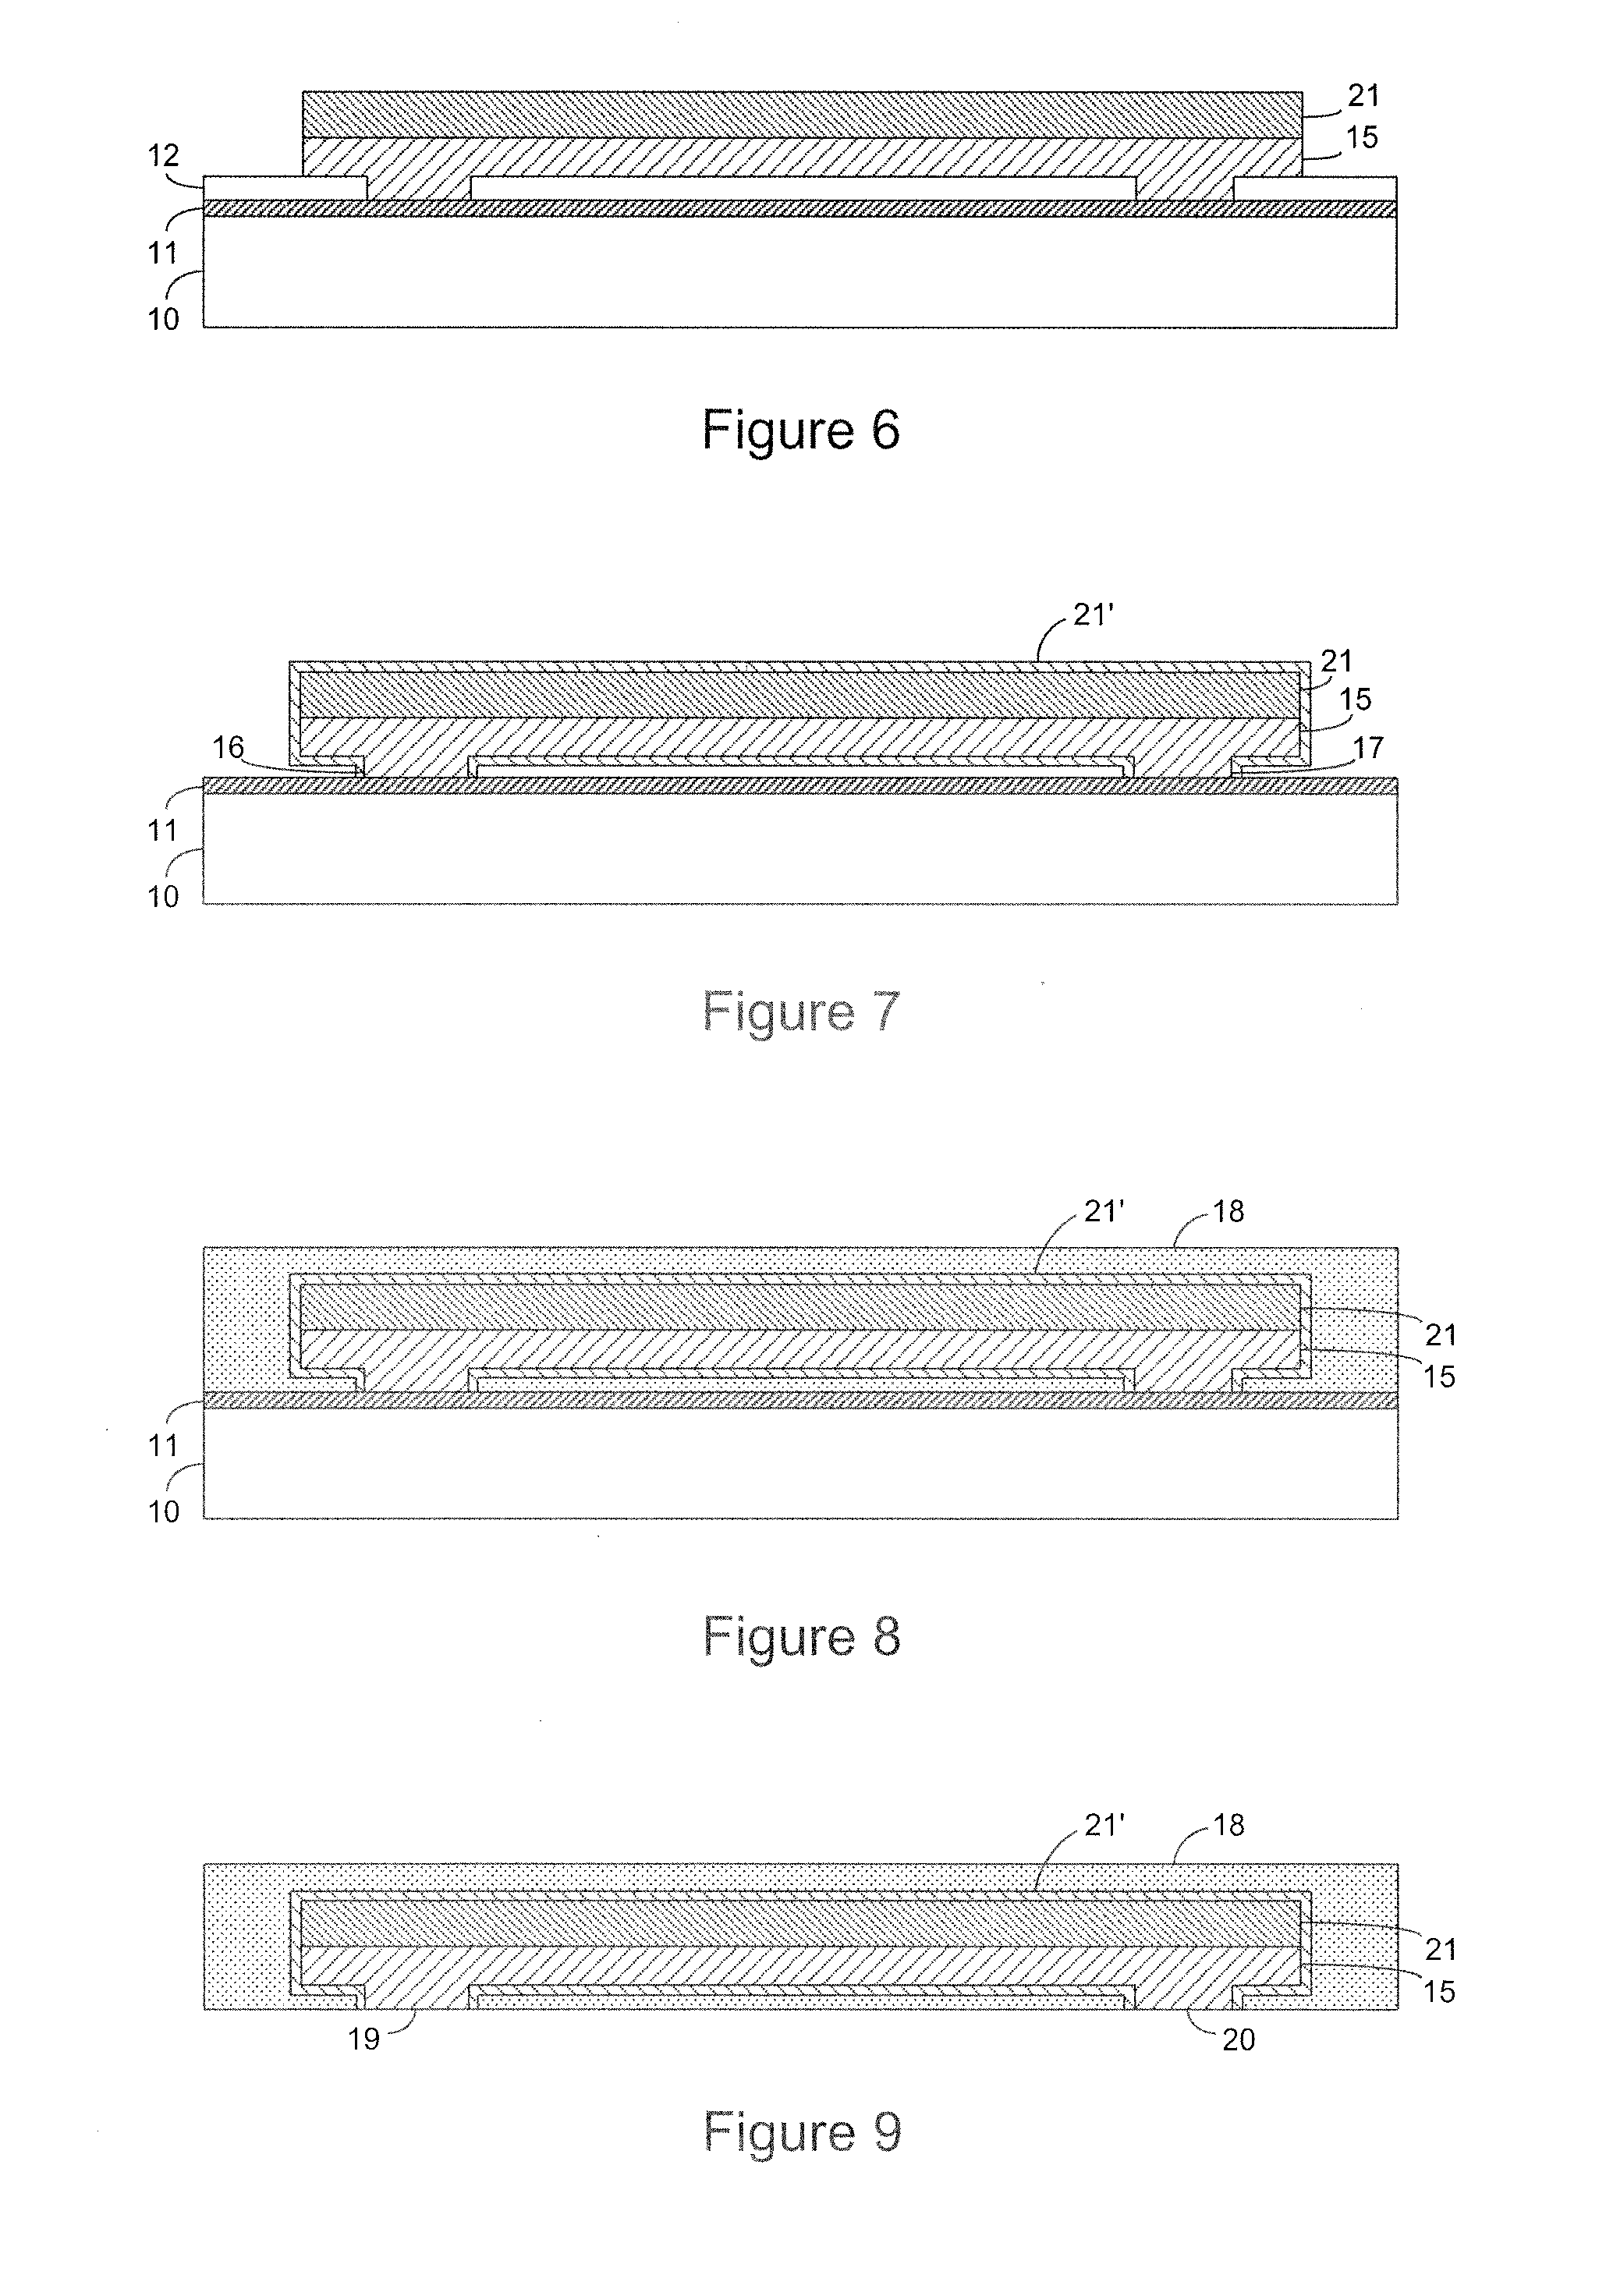 Conformally Encapsulated Multi-Electrode Arrays With Seamless Insulation